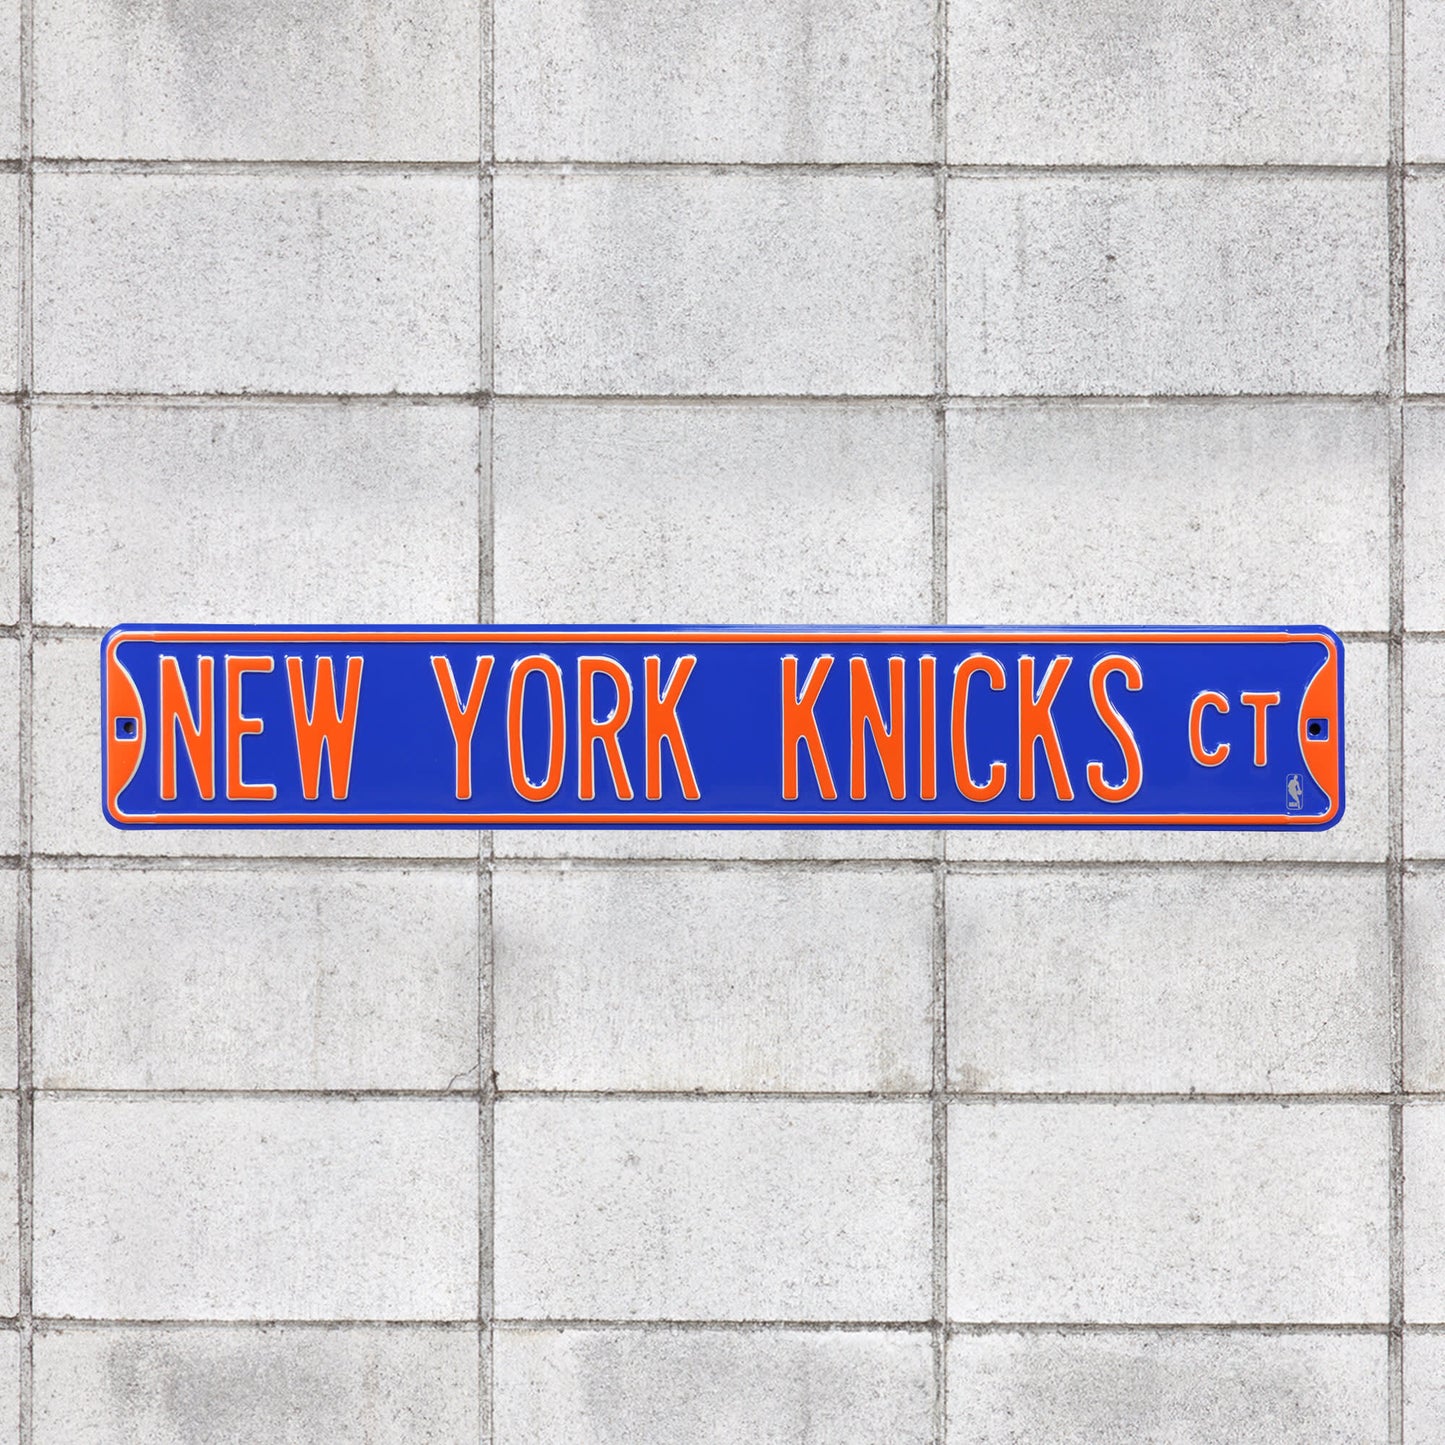 New York Knicks: Court - Officially Licensed NBA Metal Street Sign